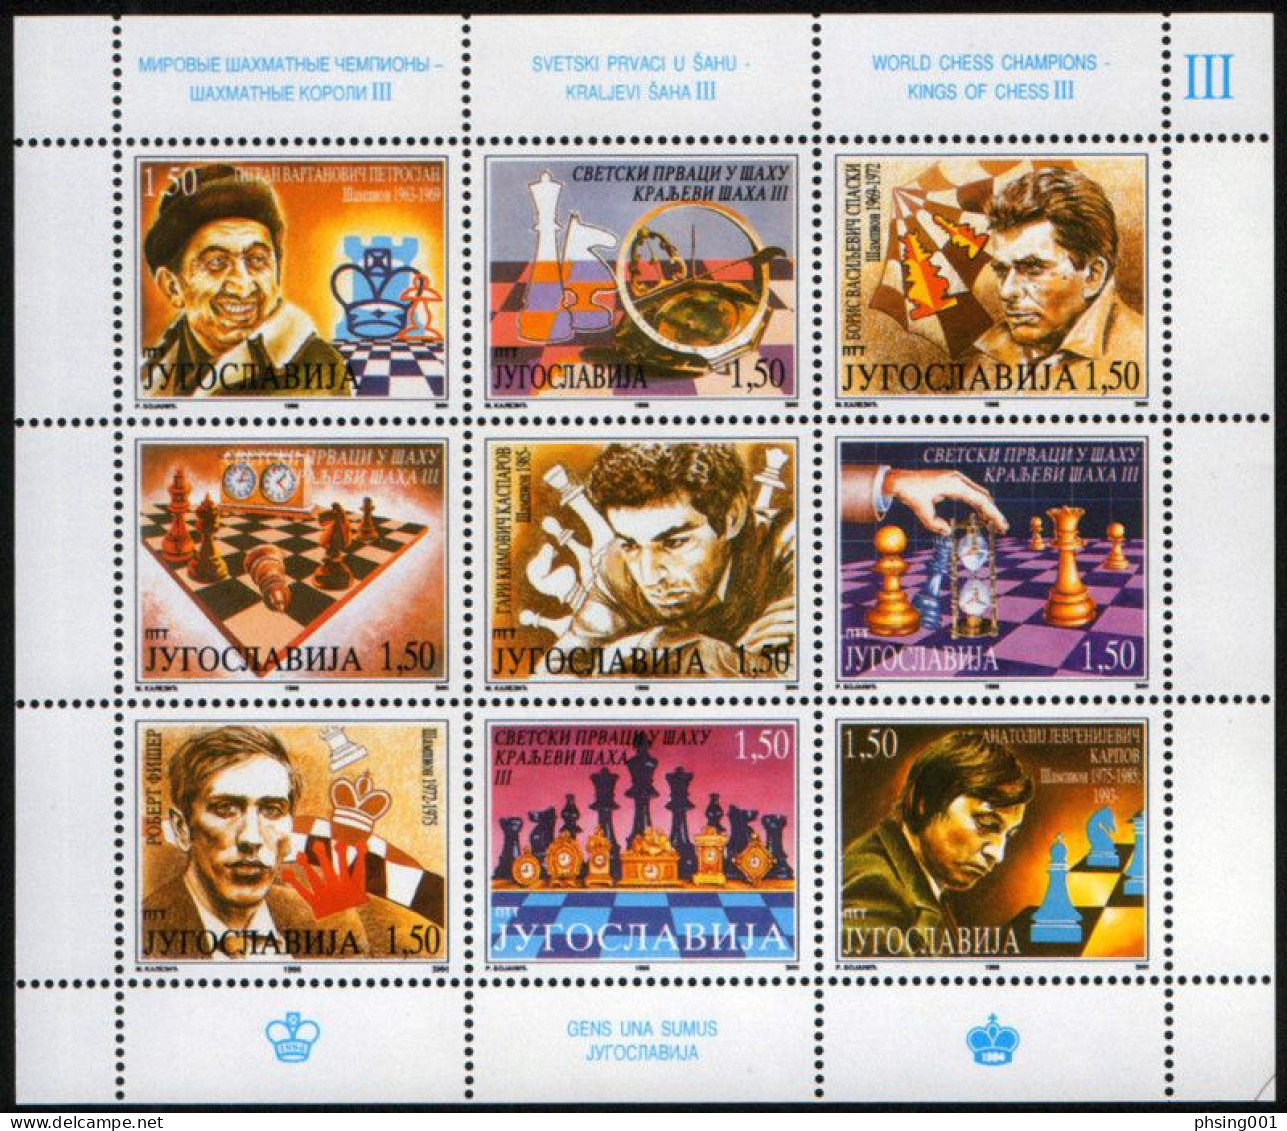 Yugoslavia 1996, Europa, Olympic Games Atlanta USA, Insects, Horses, Chess, Complete Year, MNH